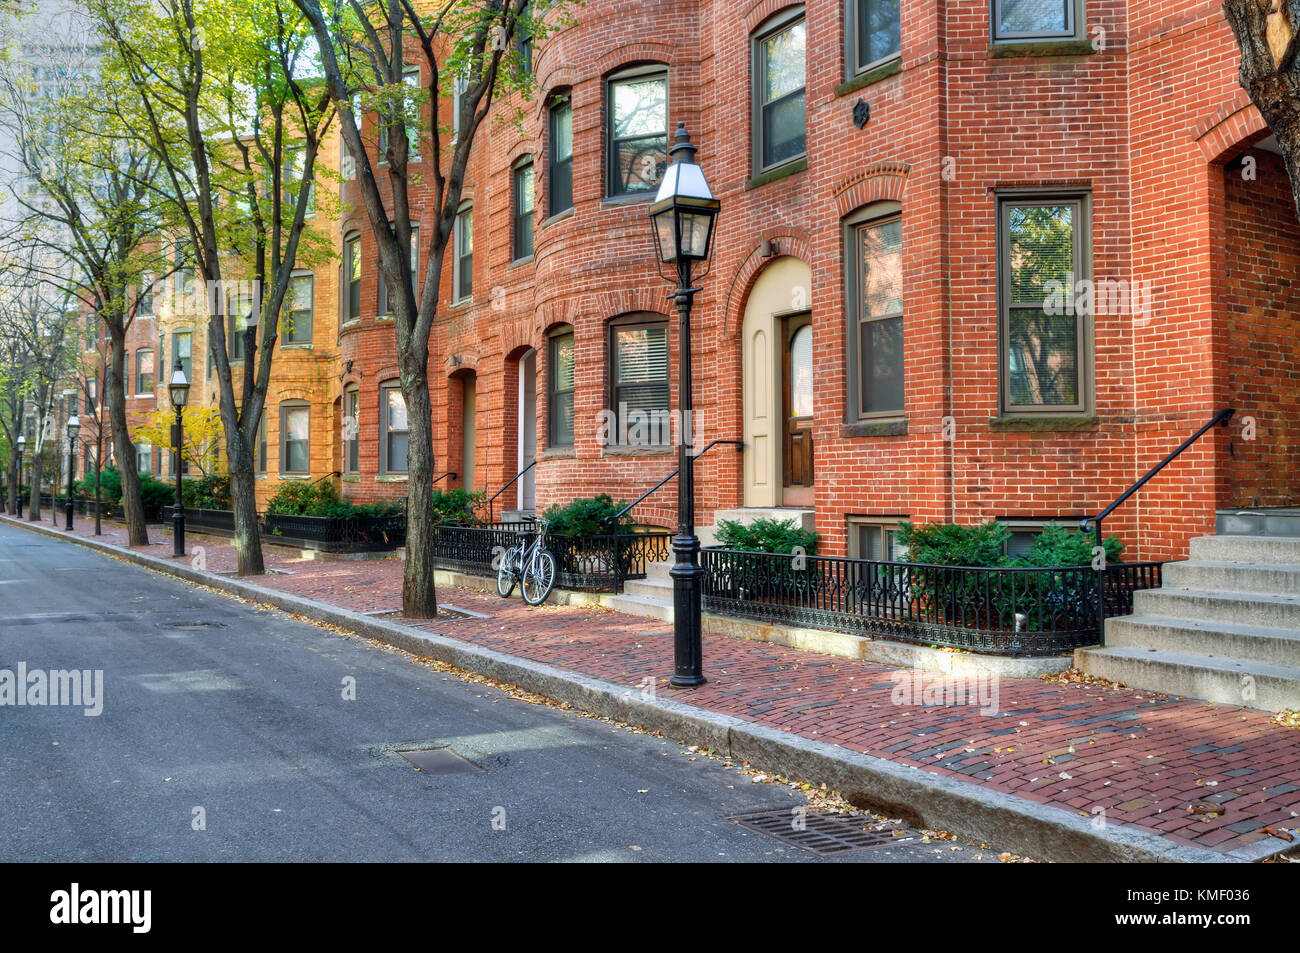 Townhouse in Back Bay, Boston. Brick apartment buildings and tree-lined street in the fall. Elegant streetscape. Stock Photo